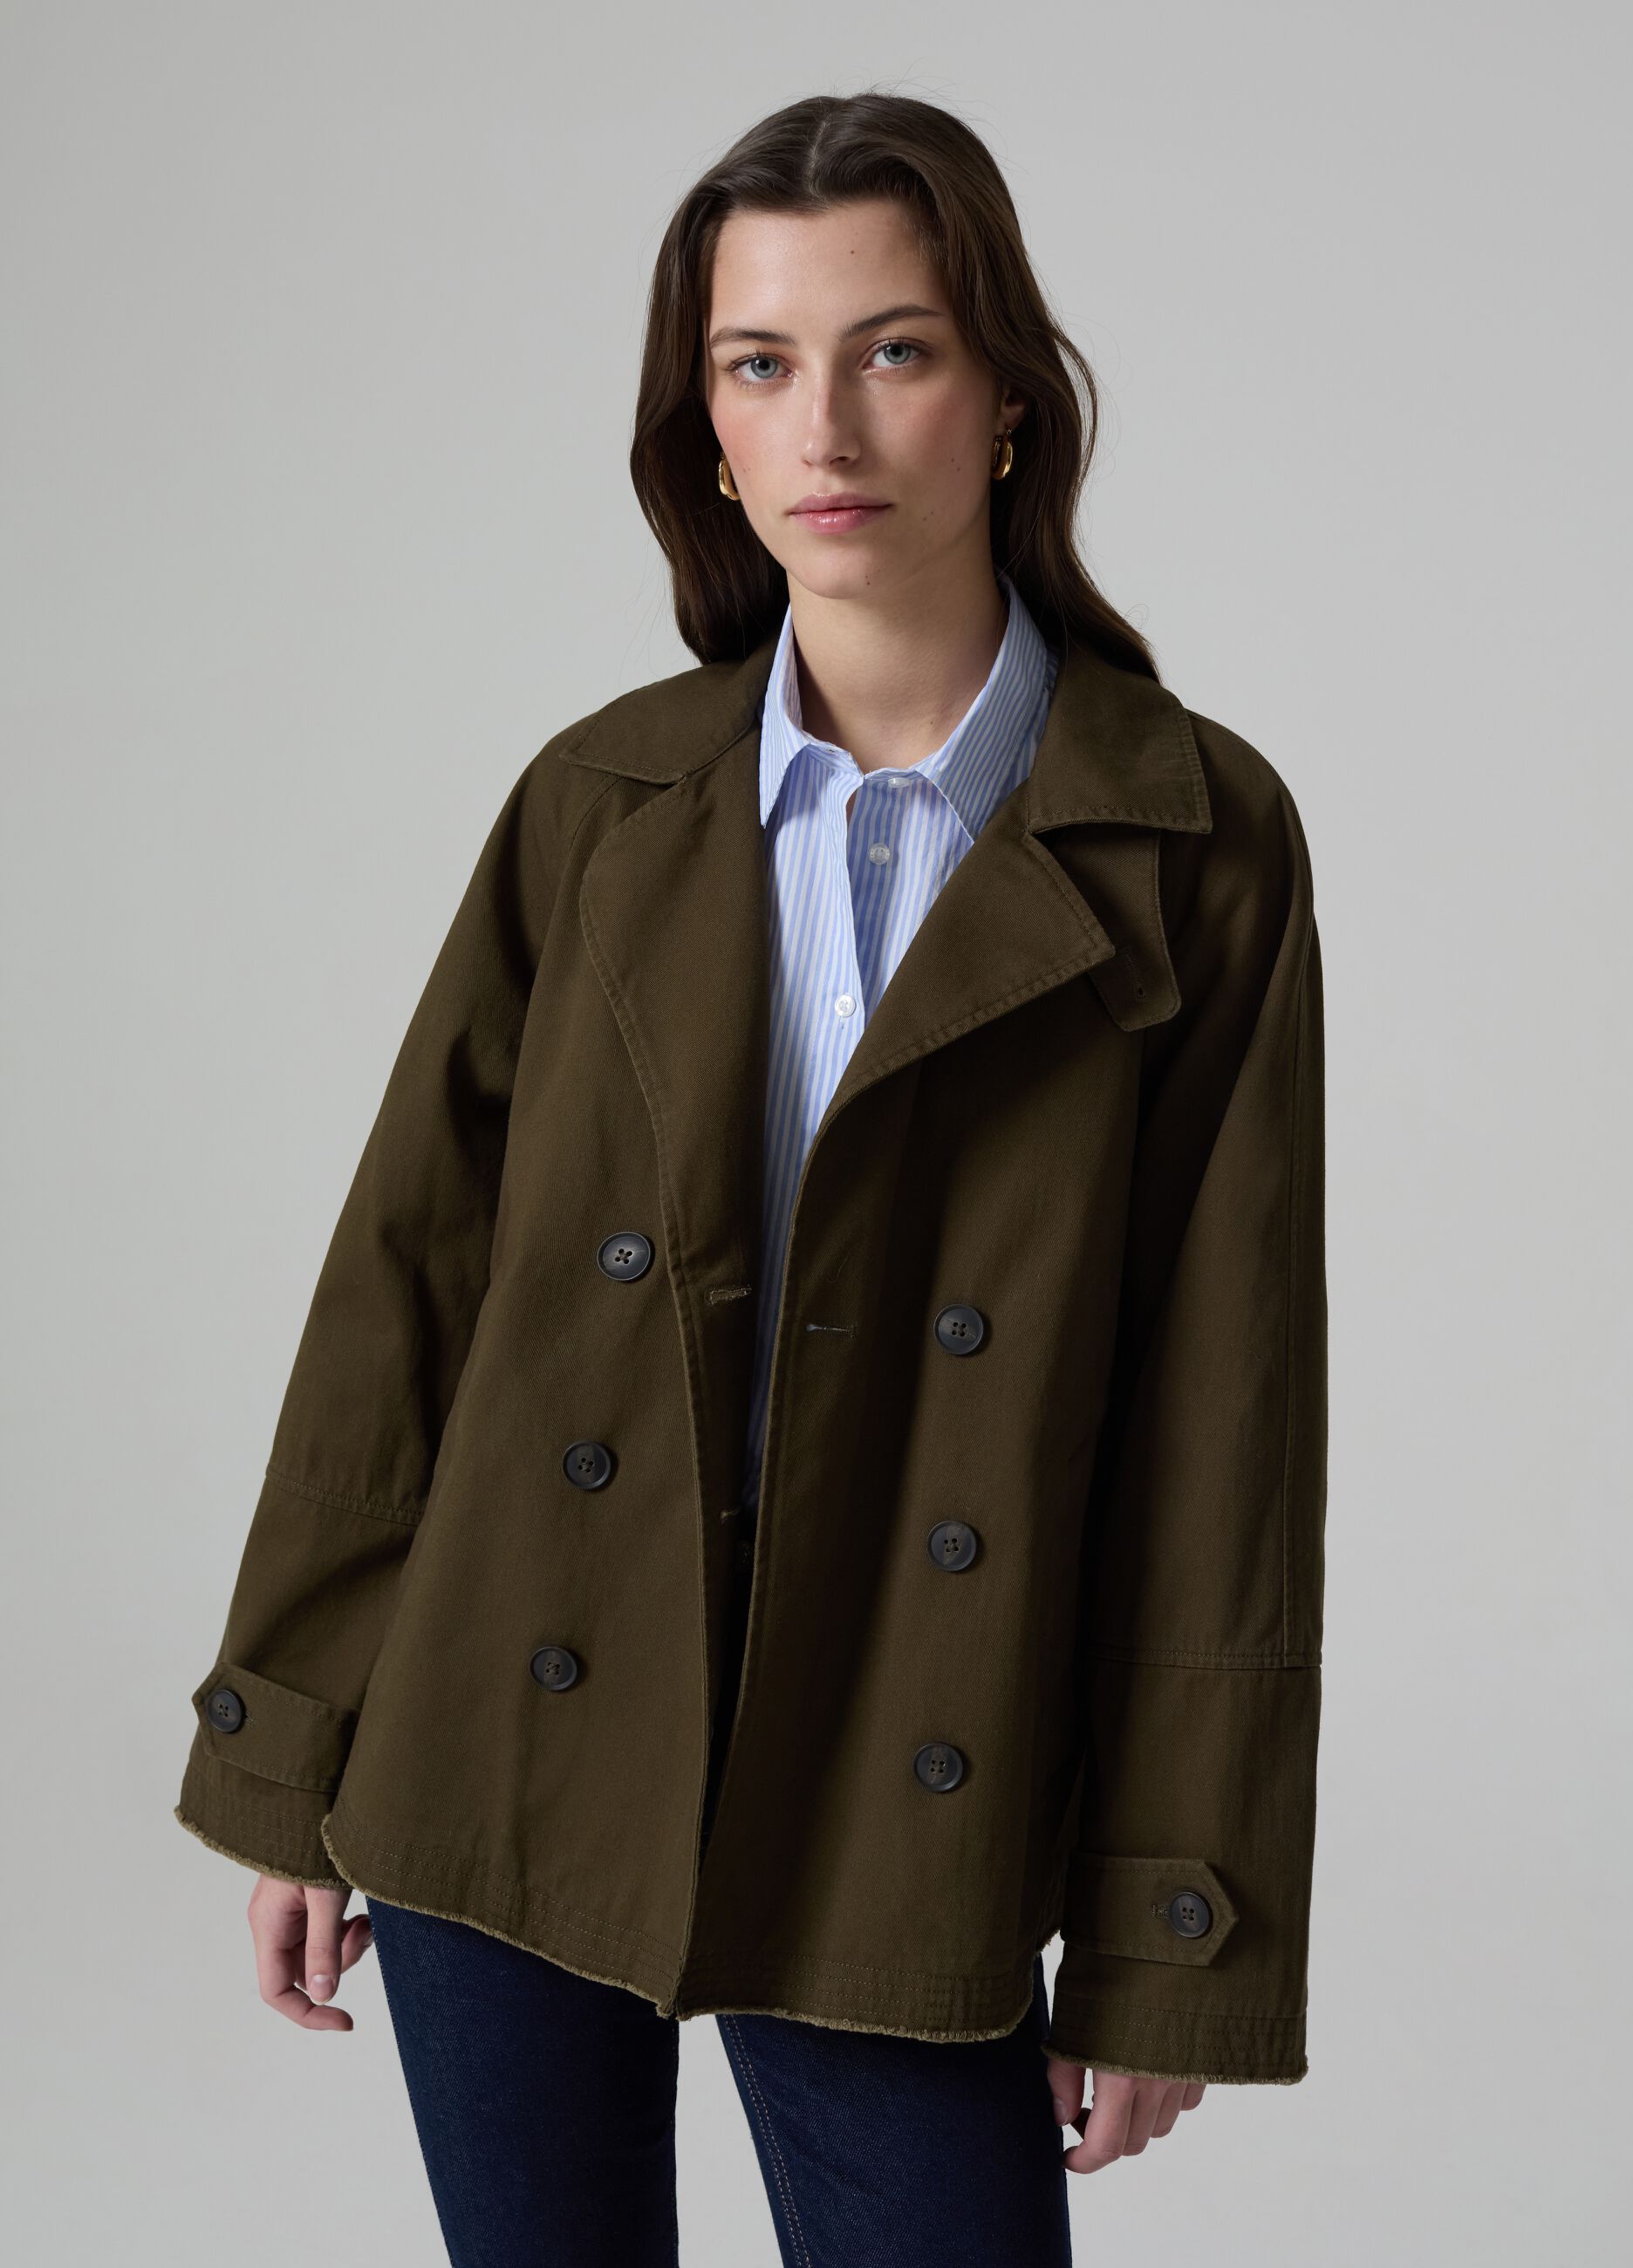 Short double-breasted trench coat